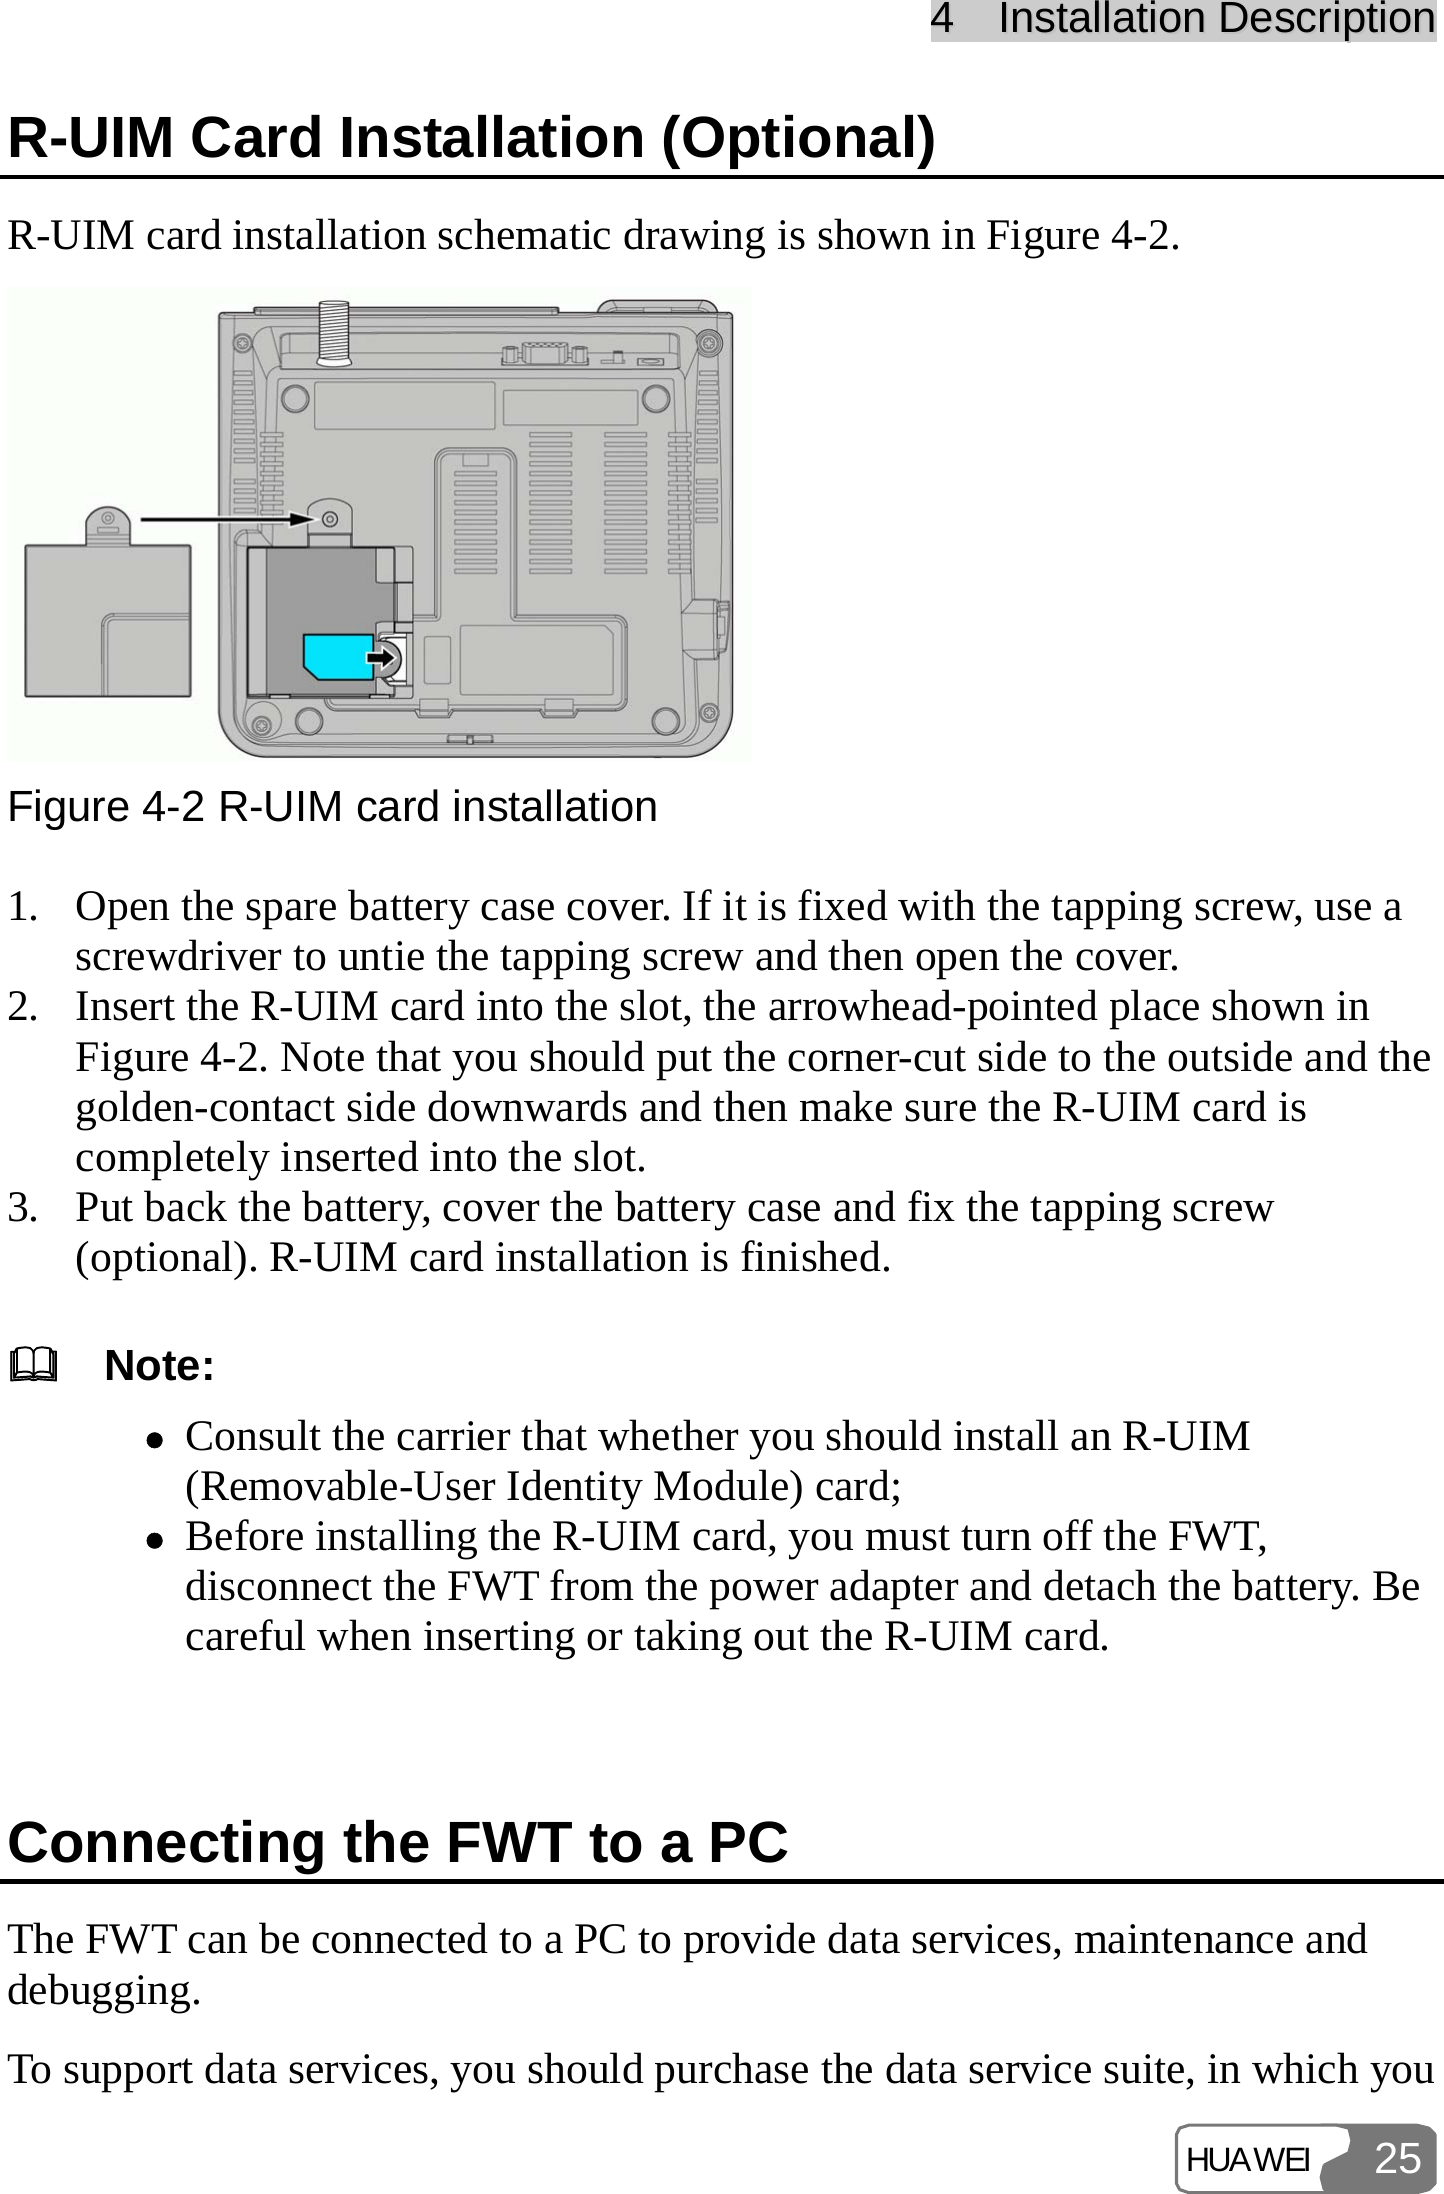 44    IInnssttaallllaattiioonn  DDeessccrriippttiioonn  HUAWEI 25R-UIM Card Installation (Optional) R-UIM card installation schematic drawing is shown in Figure 4-2.  Figure 4-2 R-UIM card installation 1. Open the spare battery case cover. If it is fixed with the tapping screw, use a screwdriver to untie the tapping screw and then open the cover. 2. Insert the R-UIM card into the slot, the arrowhead-pointed place shown in Figure 4-2. Note that you should put the corner-cut side to the outside and the golden-contact side downwards and then make sure the R-UIM card is completely inserted into the slot. 3. Put back the battery, cover the battery case and fix the tapping screw (optional). R-UIM card installation is finished.   Note: z Consult the carrier that whether you should install an R-UIM (Removable-User Identity Module) card; z Before installing the R-UIM card, you must turn off the FWT, disconnect the FWT from the power adapter and detach the battery. Be careful when inserting or taking out the R-UIM card.  Connecting the FWT to a PC The FWT can be connected to a PC to provide data services, maintenance and debugging. To support data services, you should purchase the data service suite, in which you 